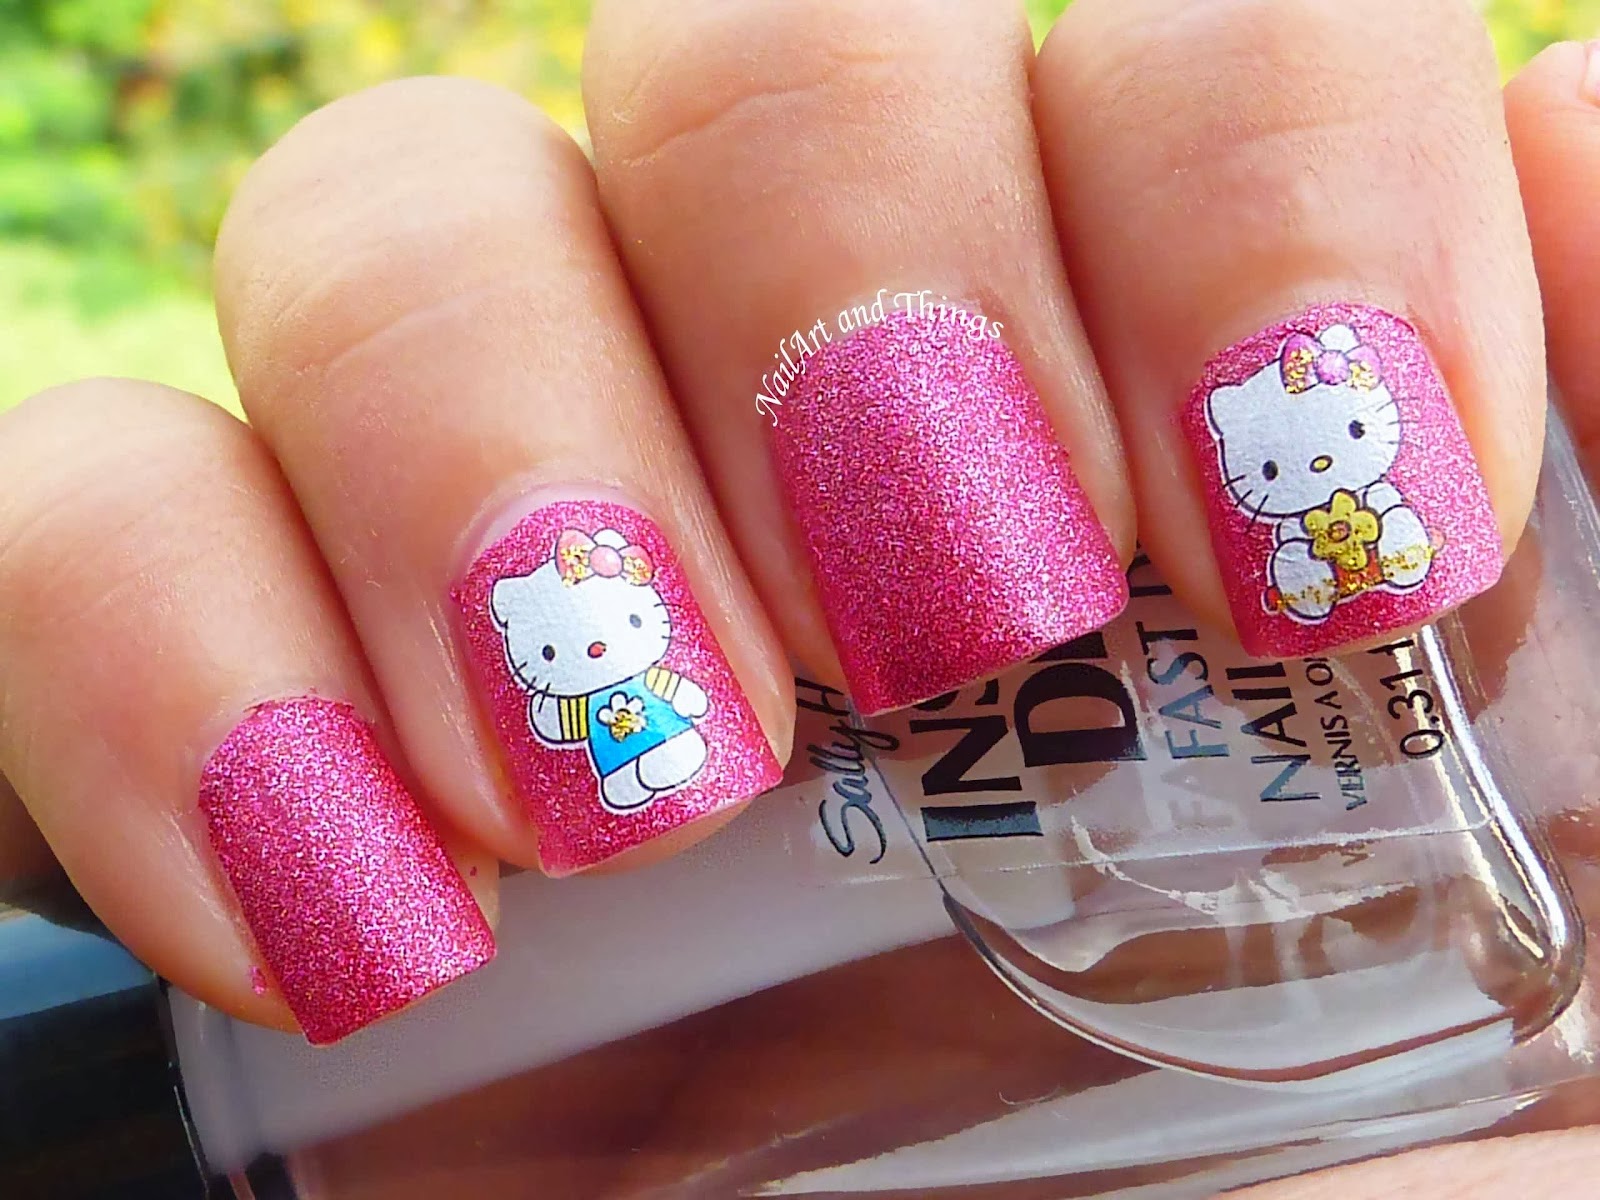 1. Hello Kitty Nail Art Designs for Cute and Adorable Nails - wide 7